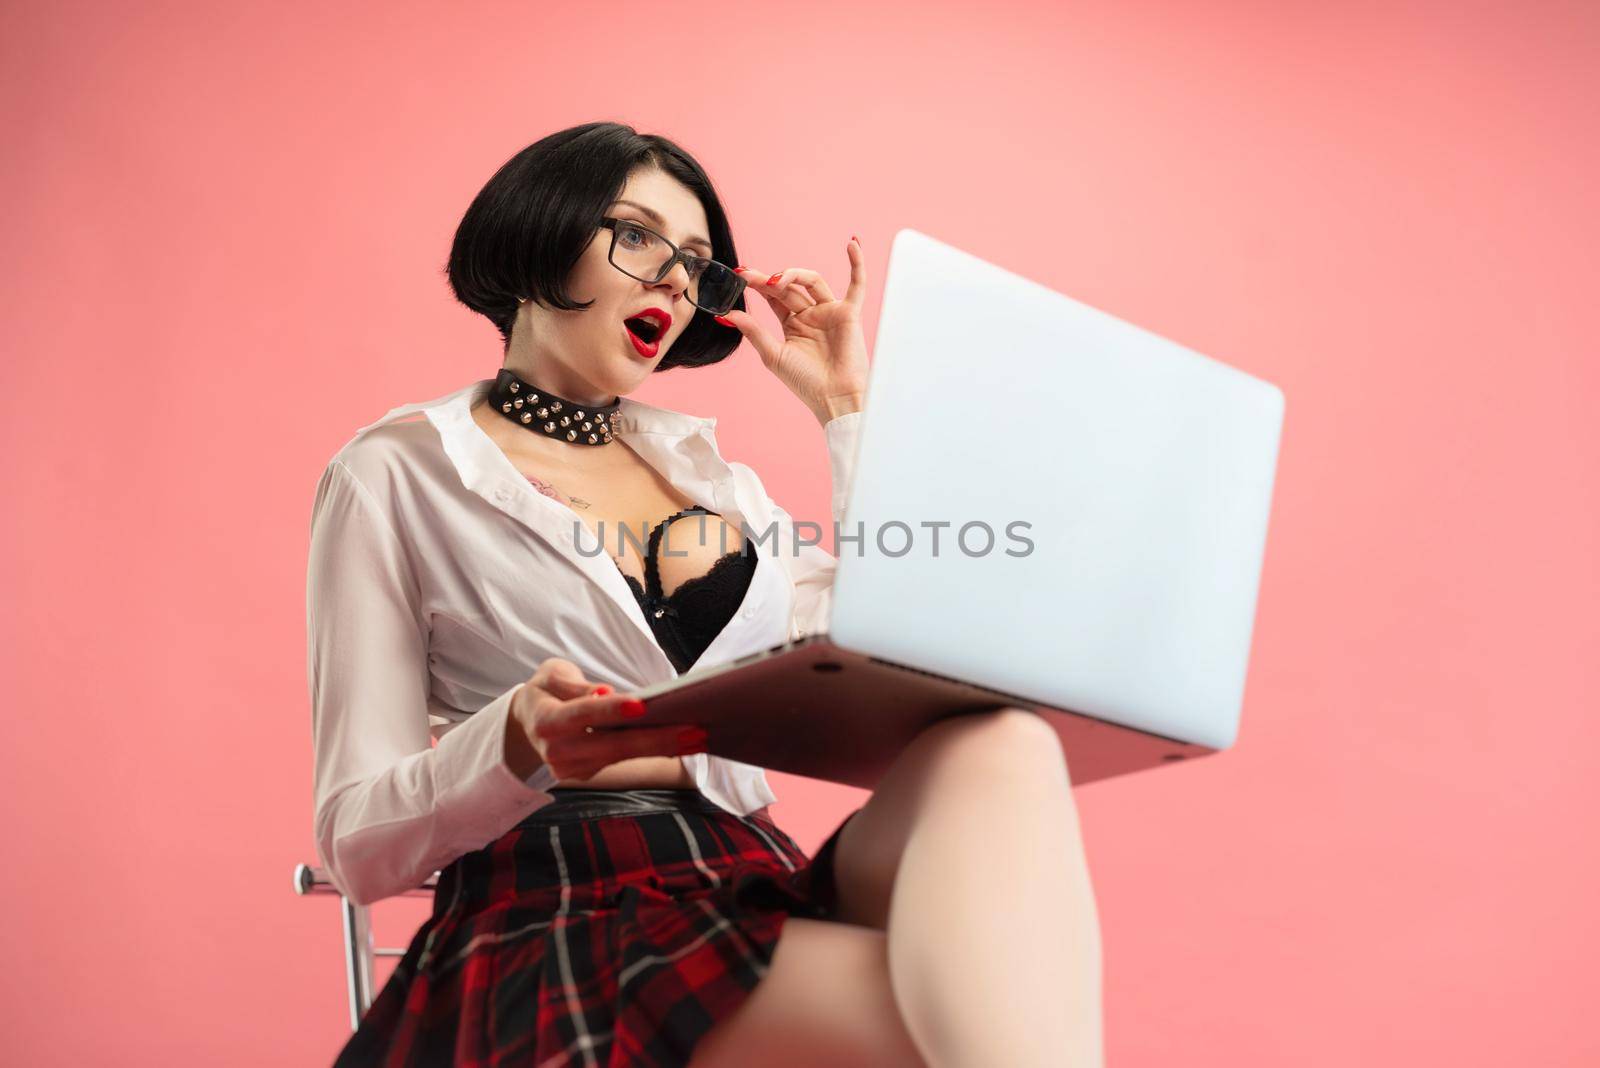 seductive woman with glasses and a laptop reacts sexually with emotions to online flirting